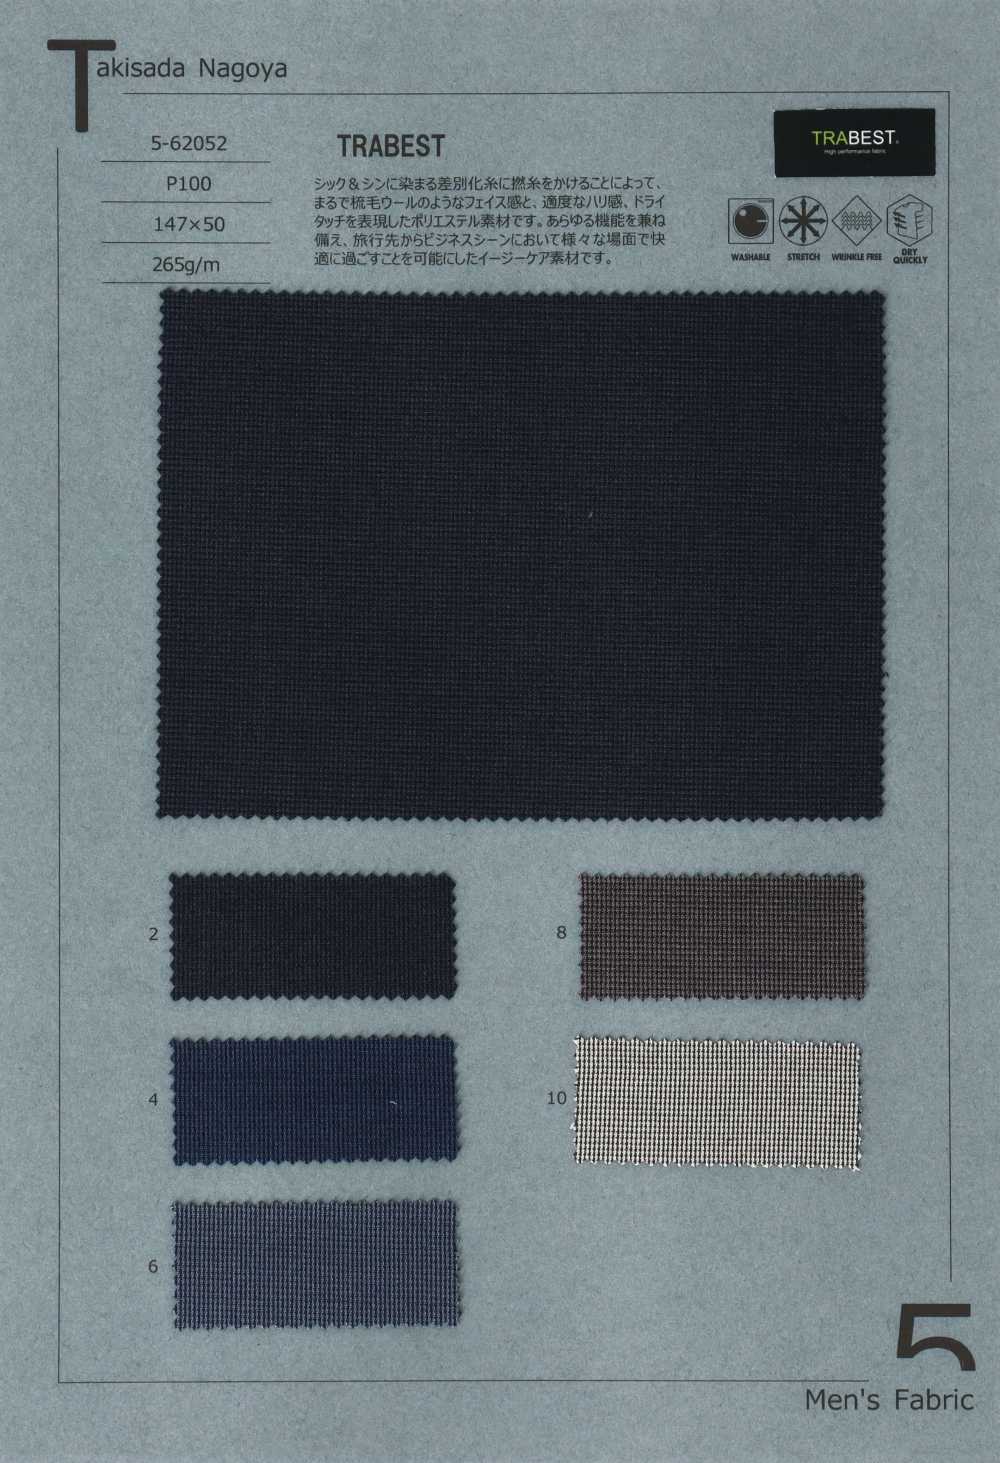 5-62052 TRABEST Attaccatura Dei Capelli Twill Dry Touch Touch[Tessile / Tessuto] Takisada Nagoya